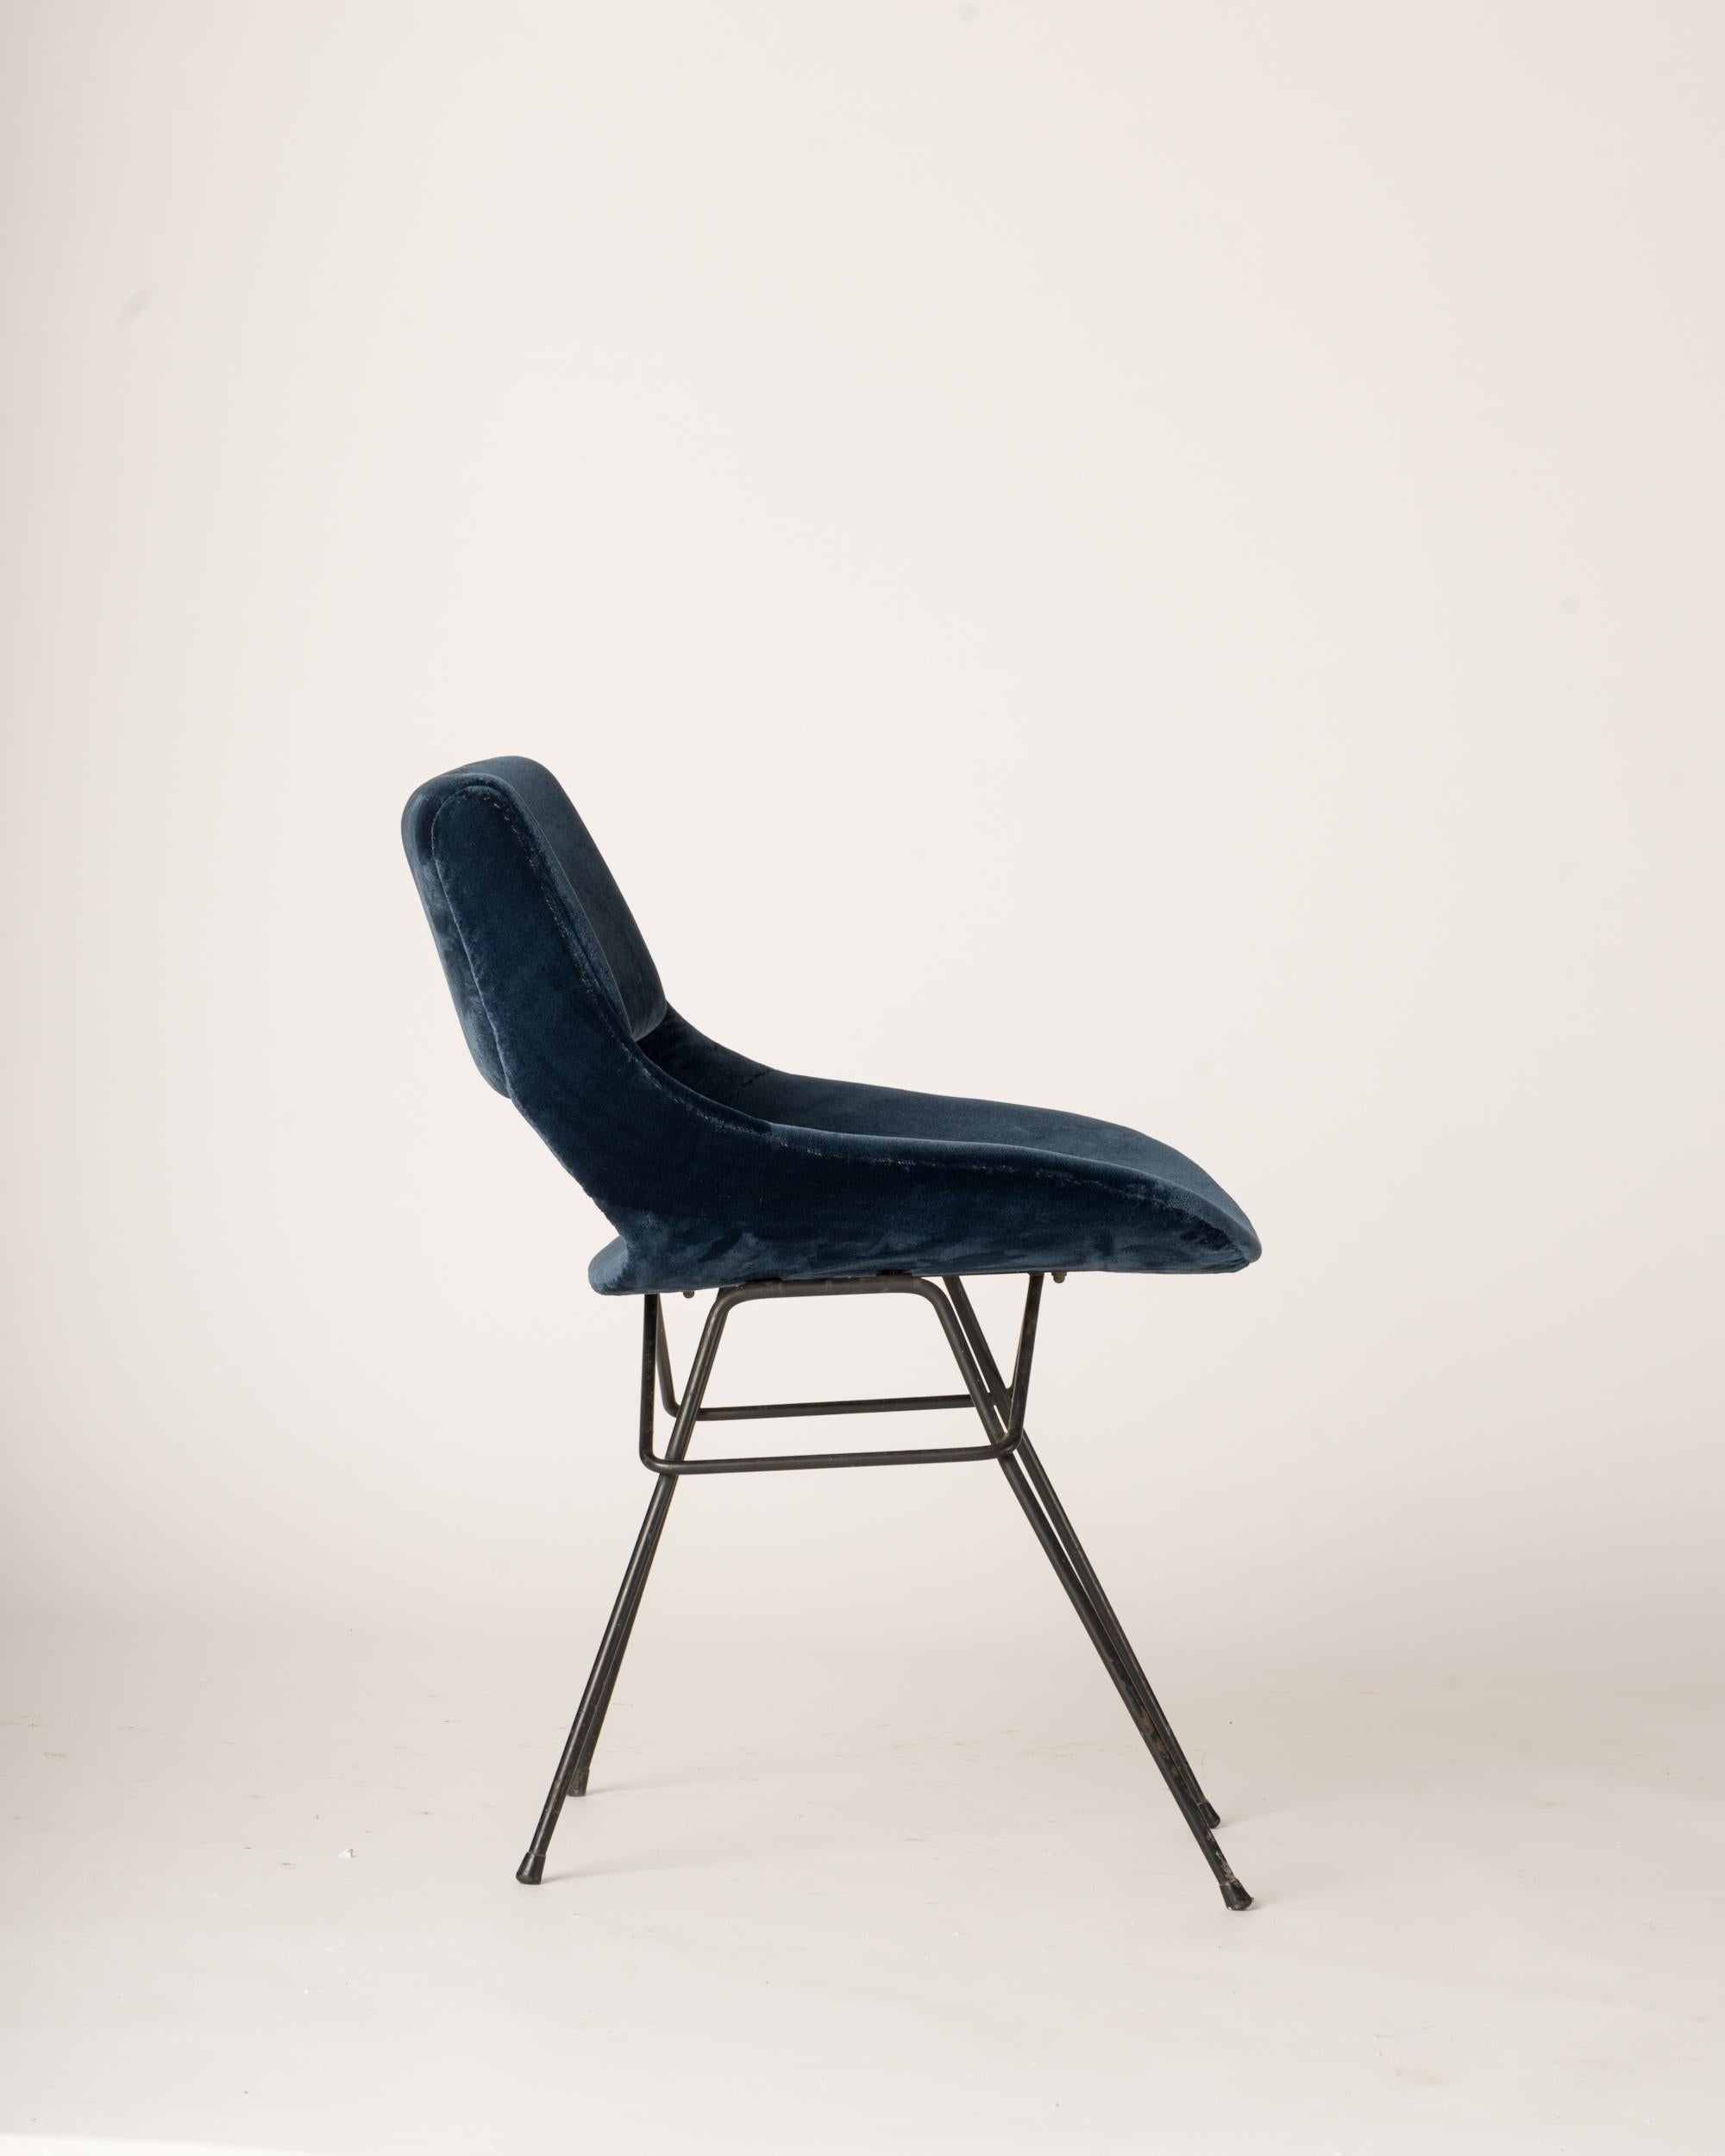 Single vintage chair by Louis Paolozzi, freshly re-upholstered in blue velvet.
Weakness in backrest structure has been fixed before reupholstery.
This chair will ship from France and can be returned to either France or to an upstate NY